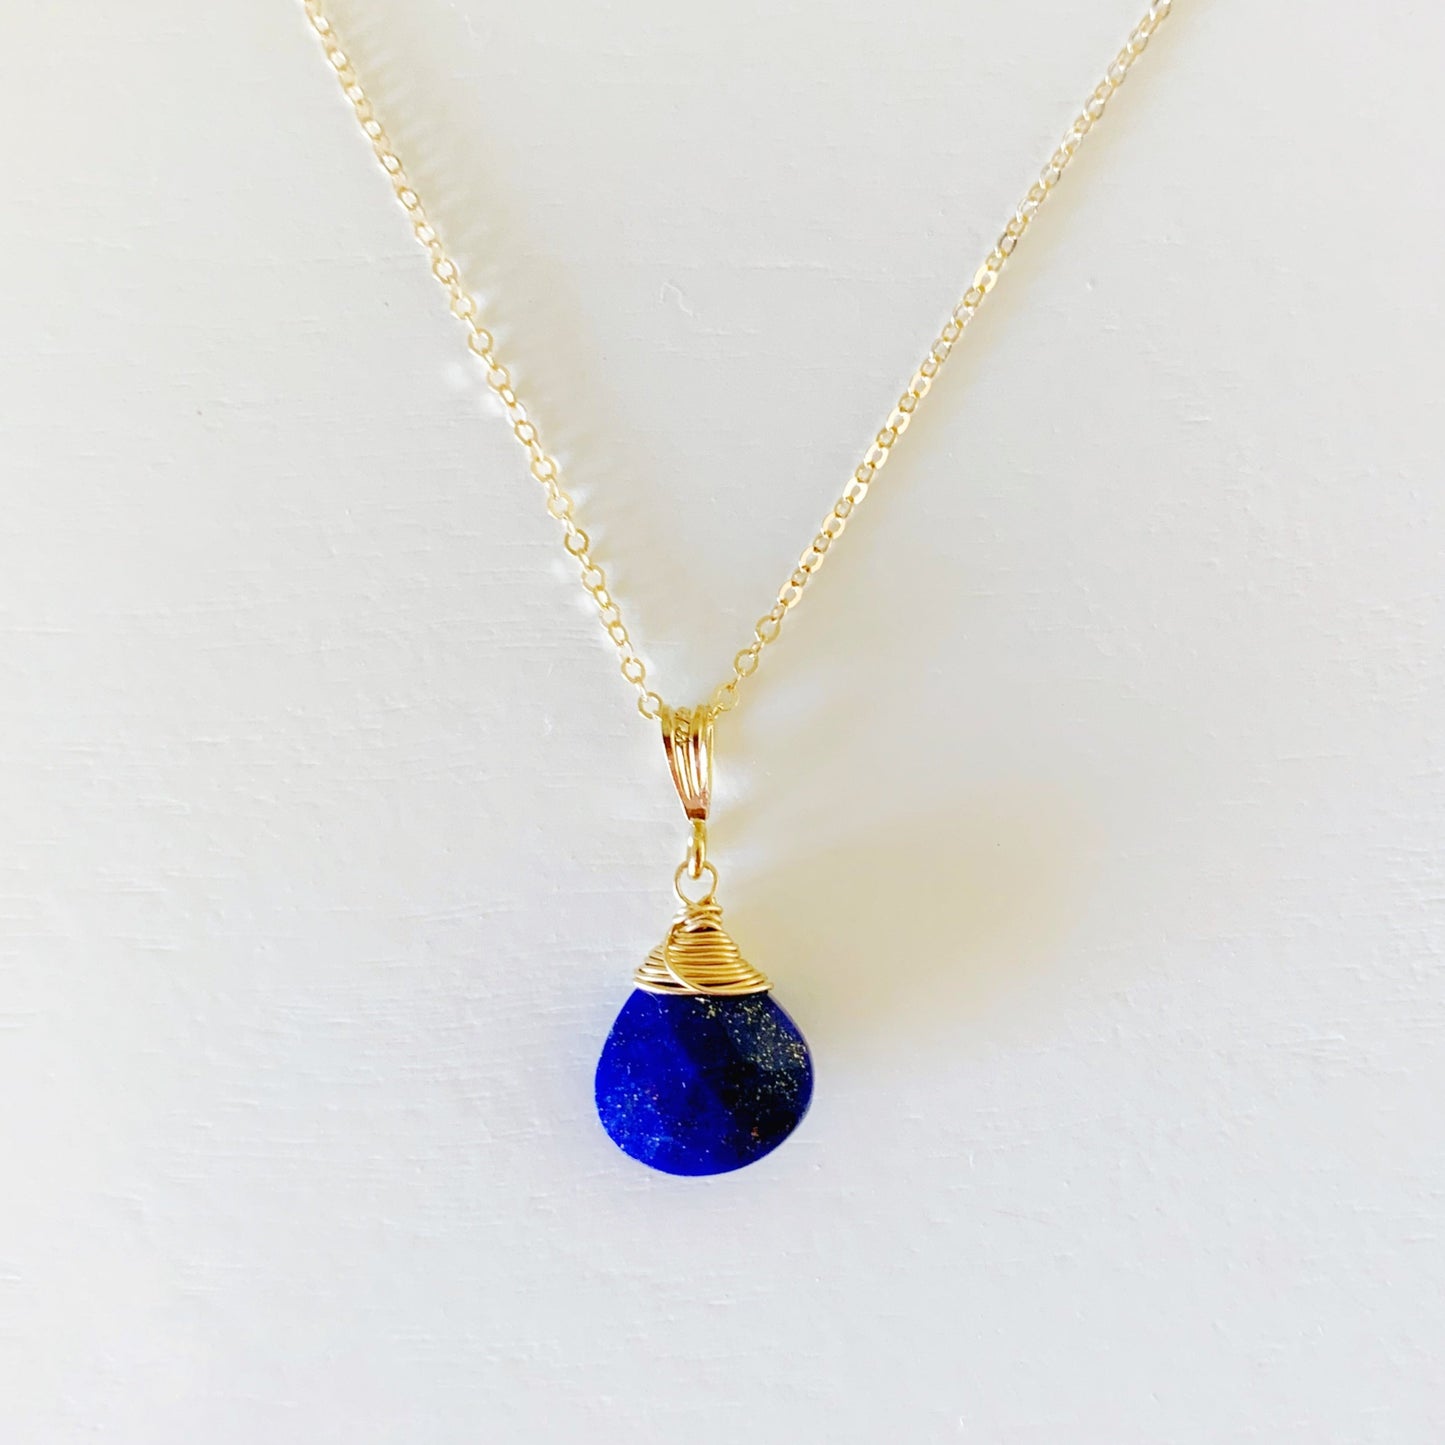 The Neptune pendant necklace by mermaids and madeleines is designed with lapis and 14k gold filled findings and chain. This necklace is photographed on a white surface